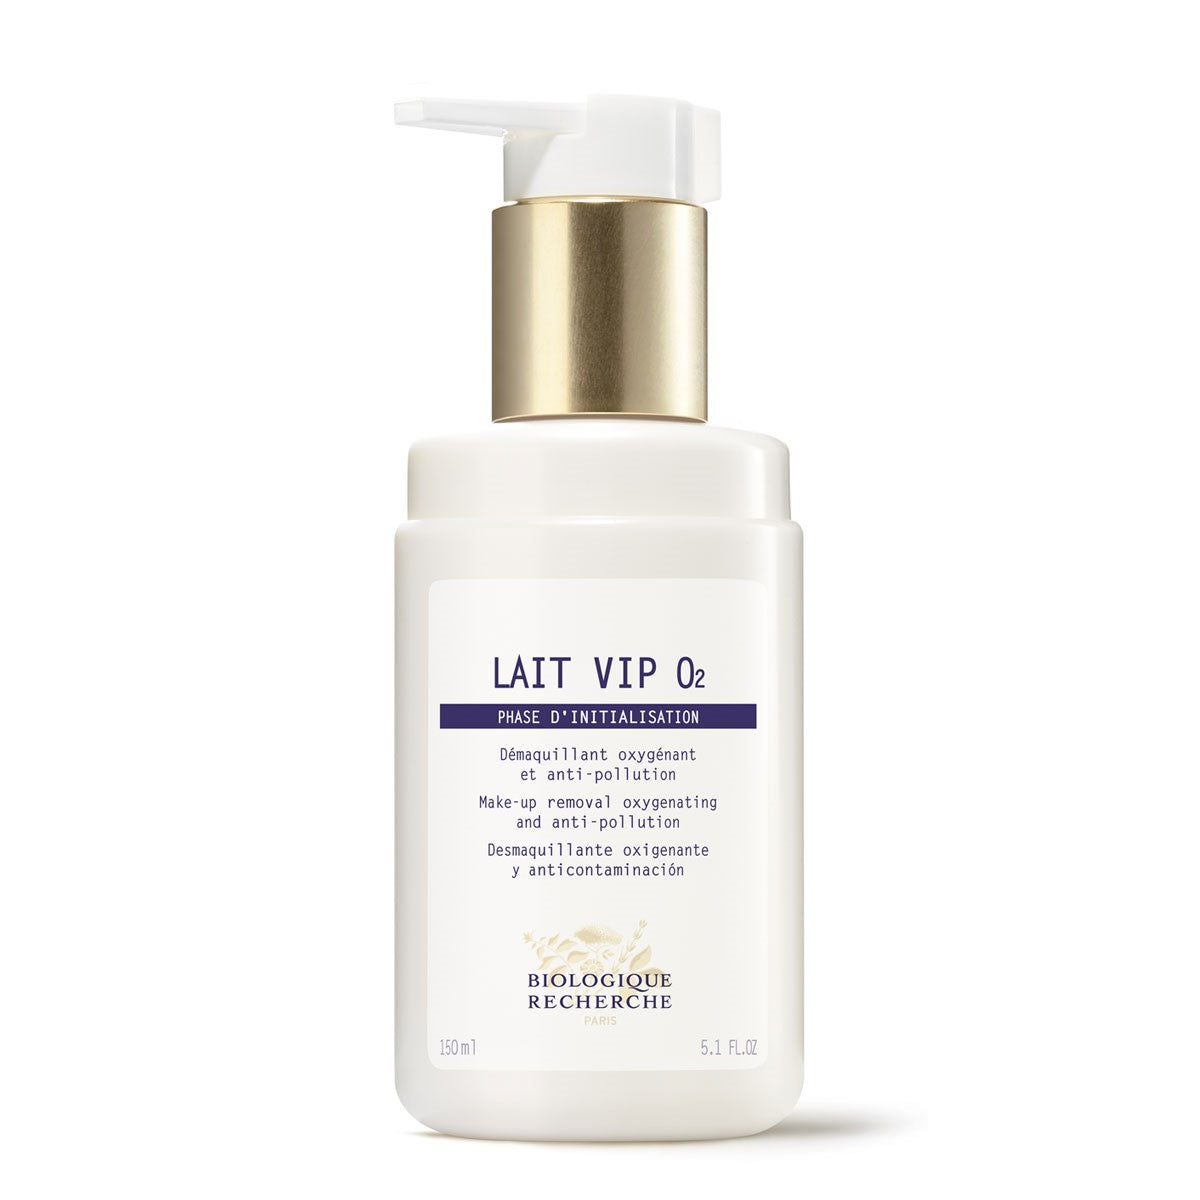 Lait Vip O2 -- Makeup Remover ** Protective Cleansing Milk with Oxygenating Complex